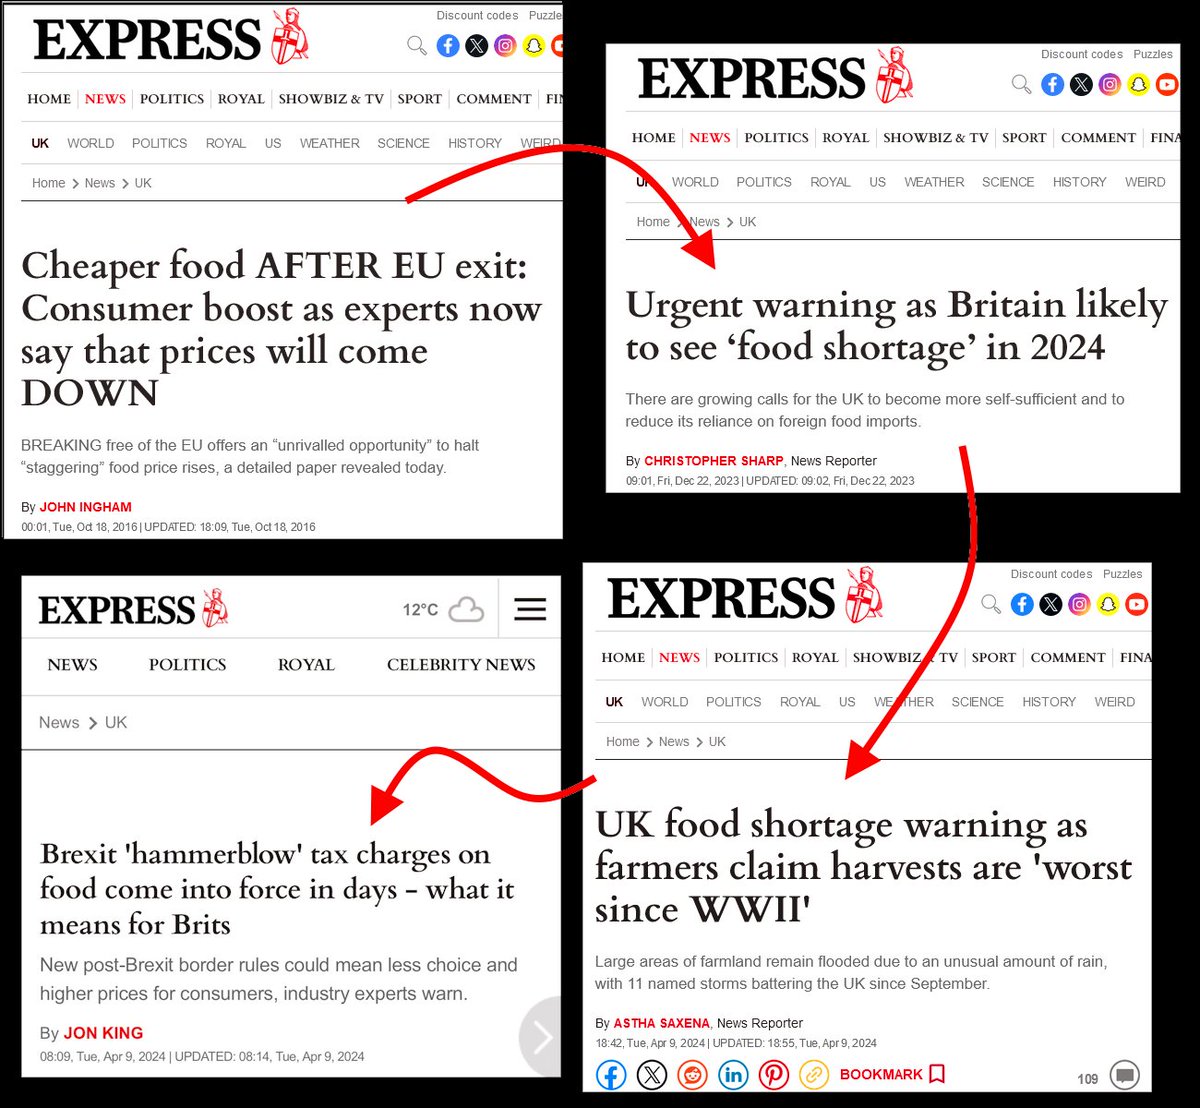 The Express brings you... 'Brexit and Food: A Tragedy in Four Acts' (It's not JUST Brexit. Other factors were also key contributors, including recent record flooding. But it is beyond dispute that Brexit played a major part.)